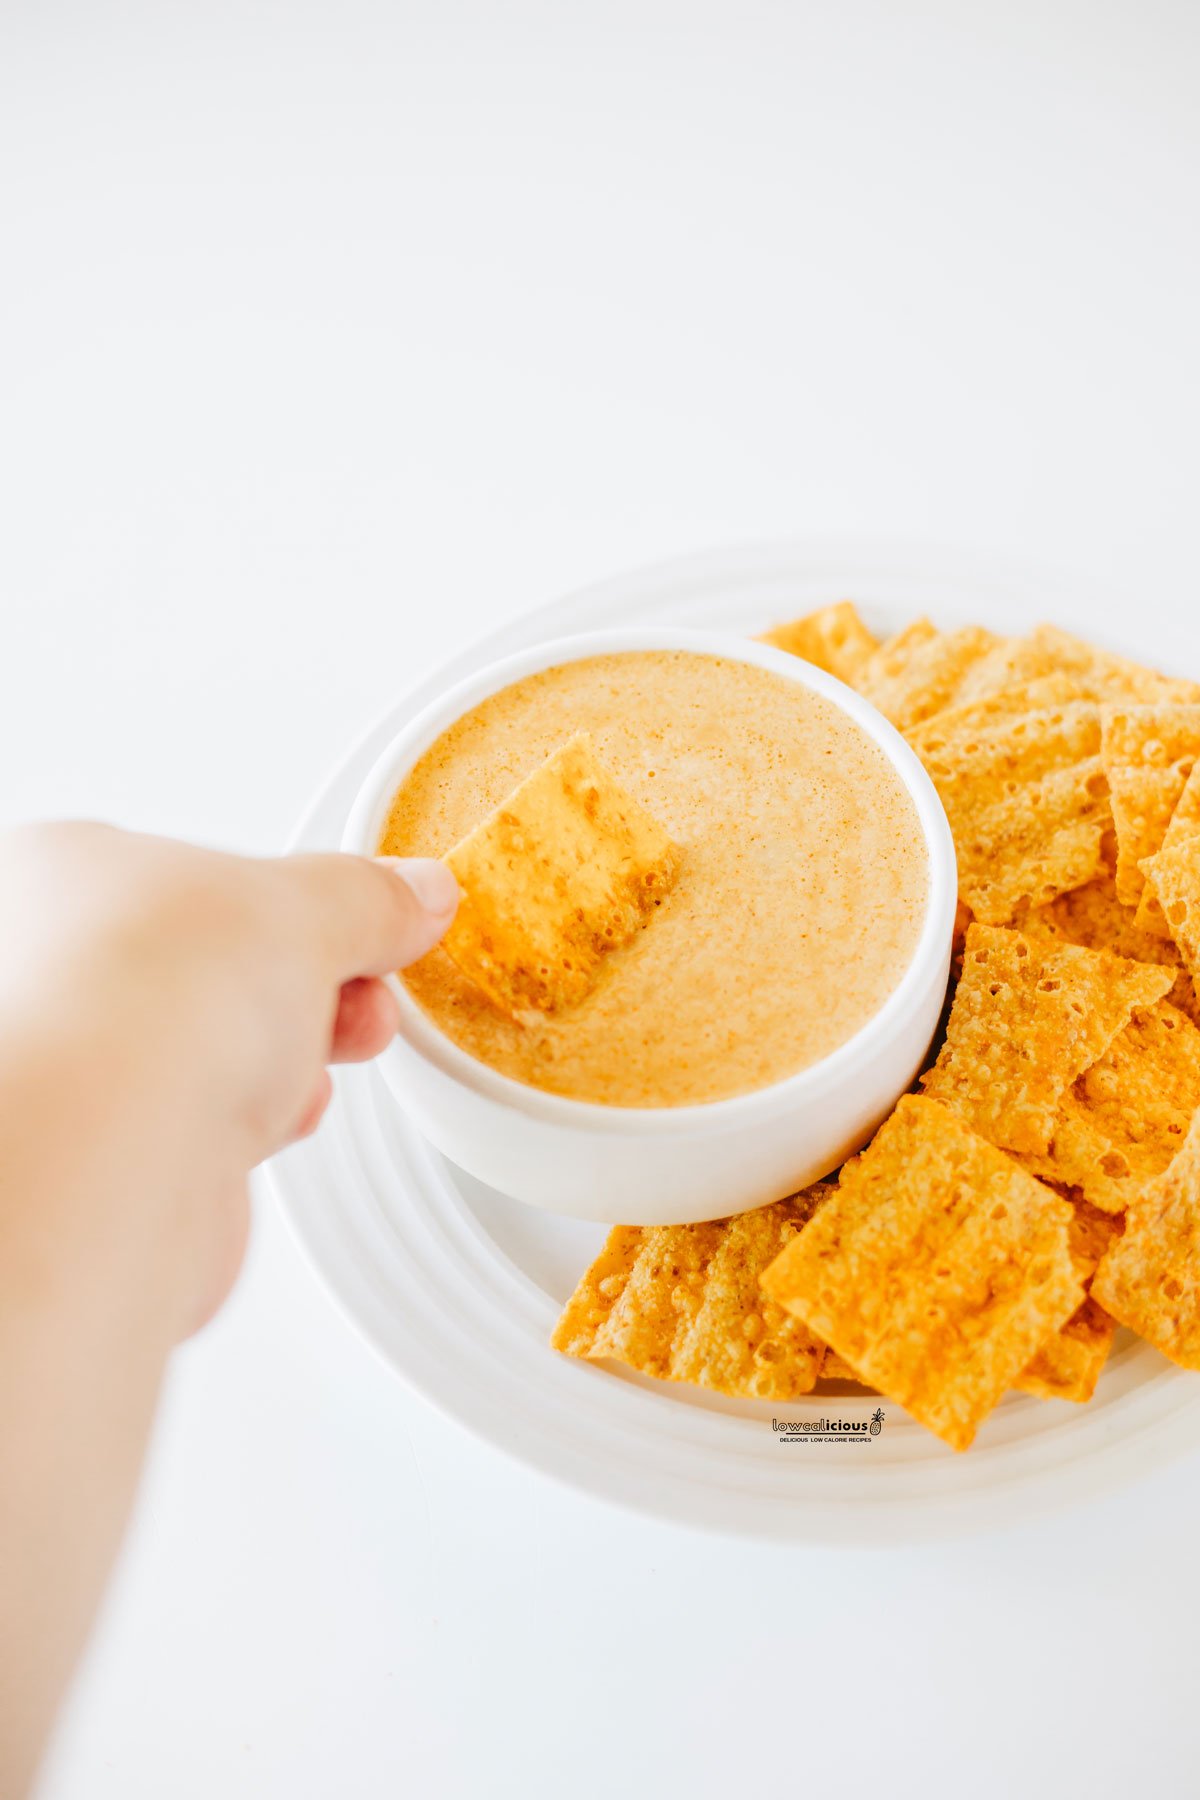 a hand holding an orange Sun Chip and dipping it into prepared Viral TikTok Cottage Cheese Queso Dip